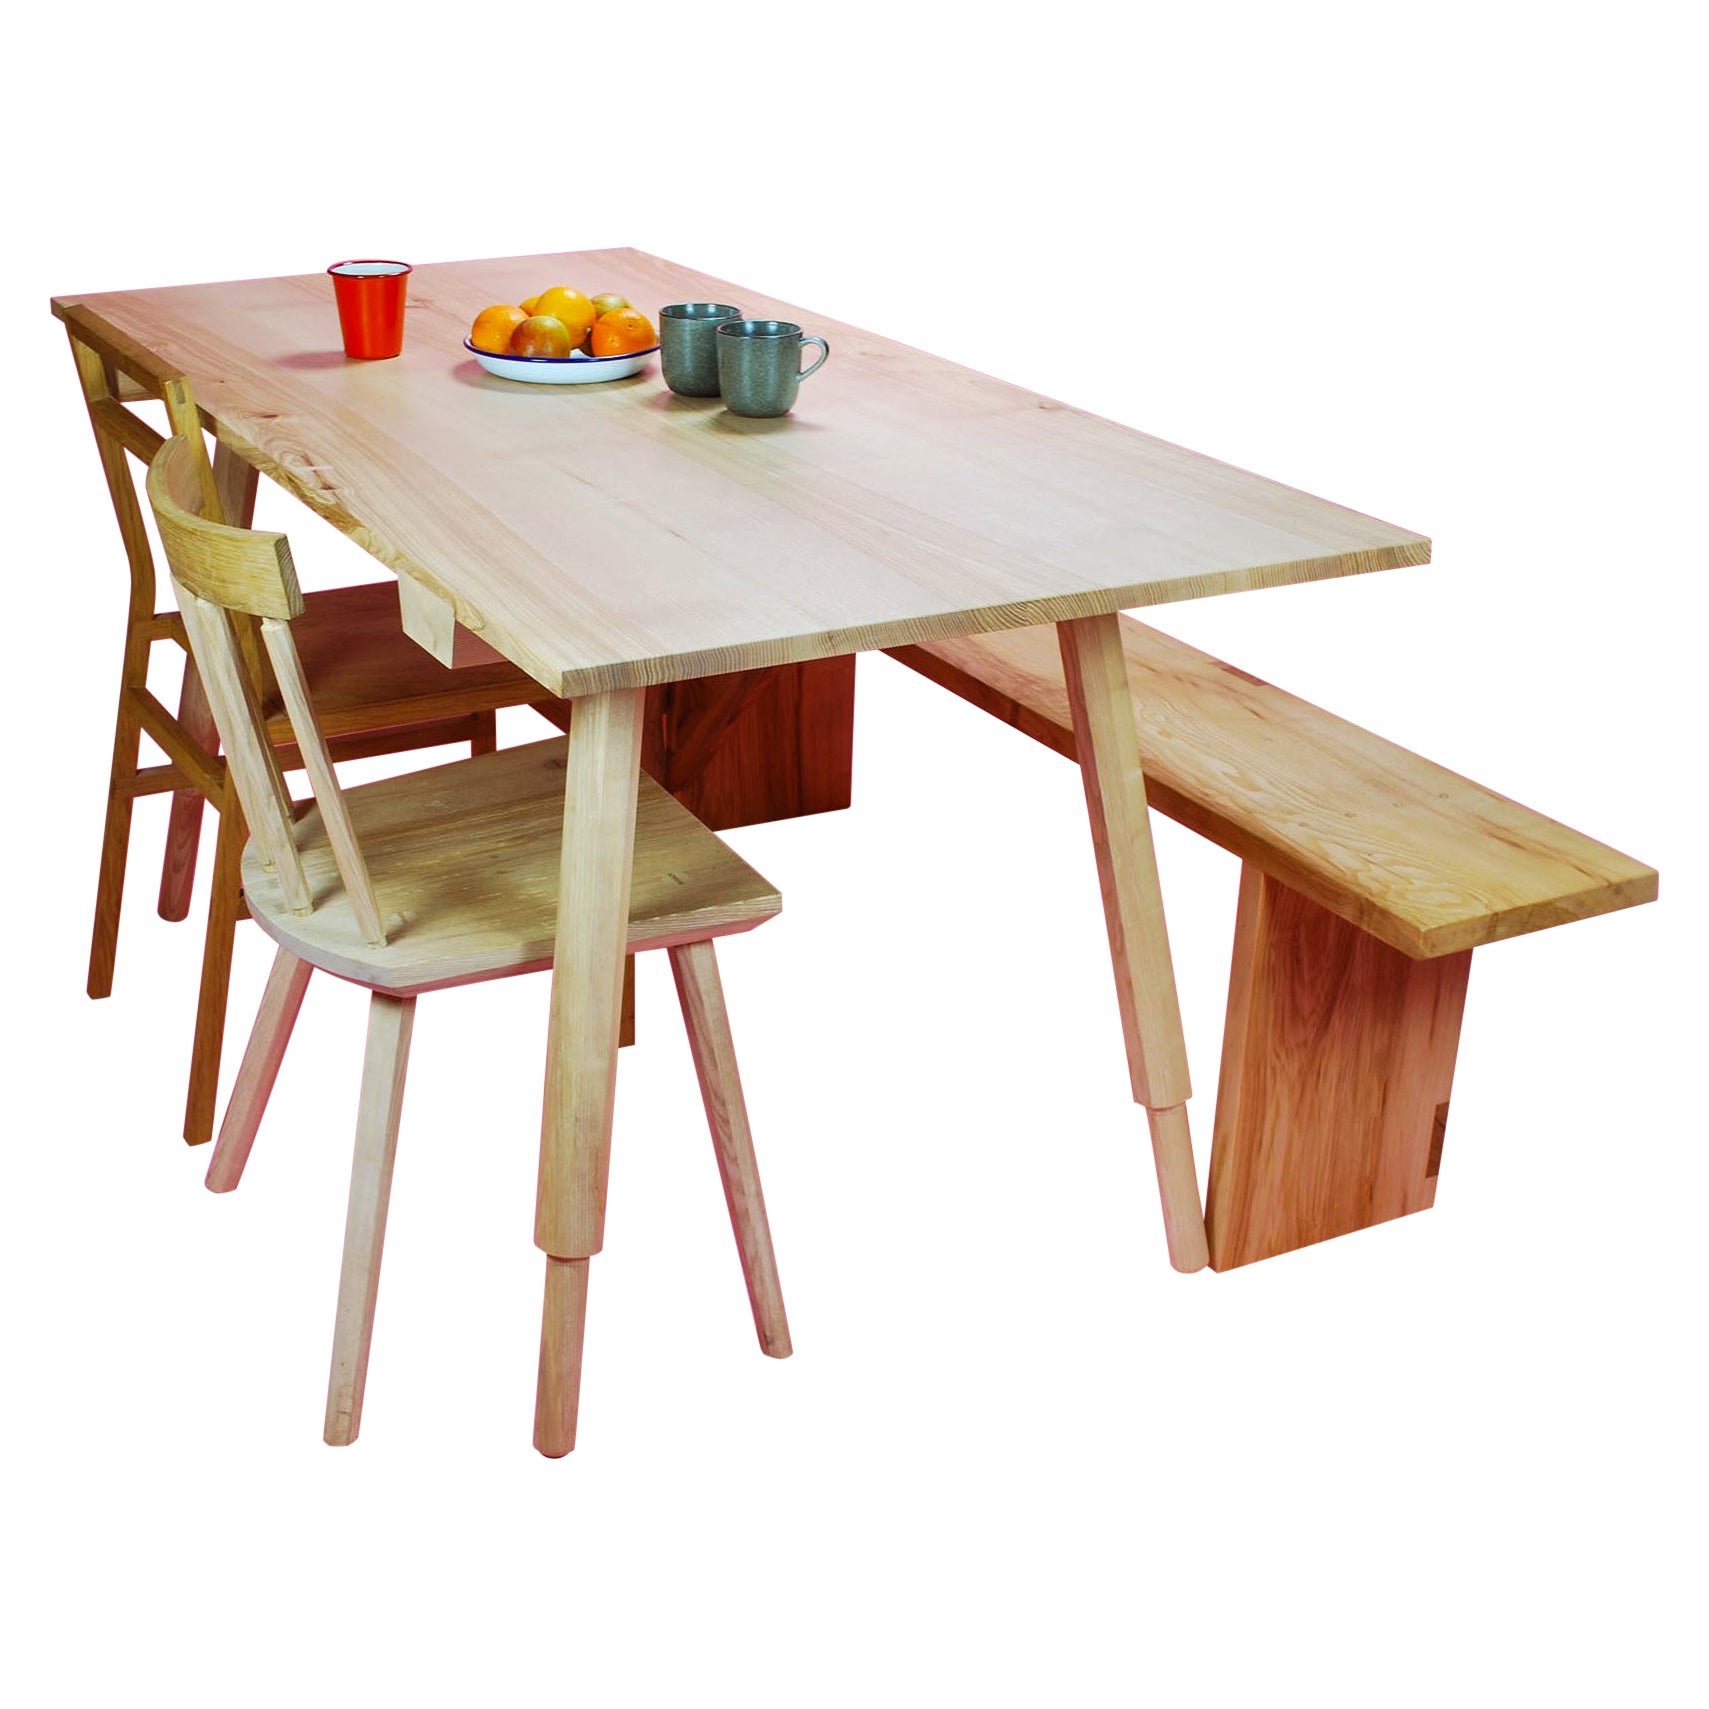 Dining Table, Solid Ash with Screw in Legs, Design by Loose Fit, UK